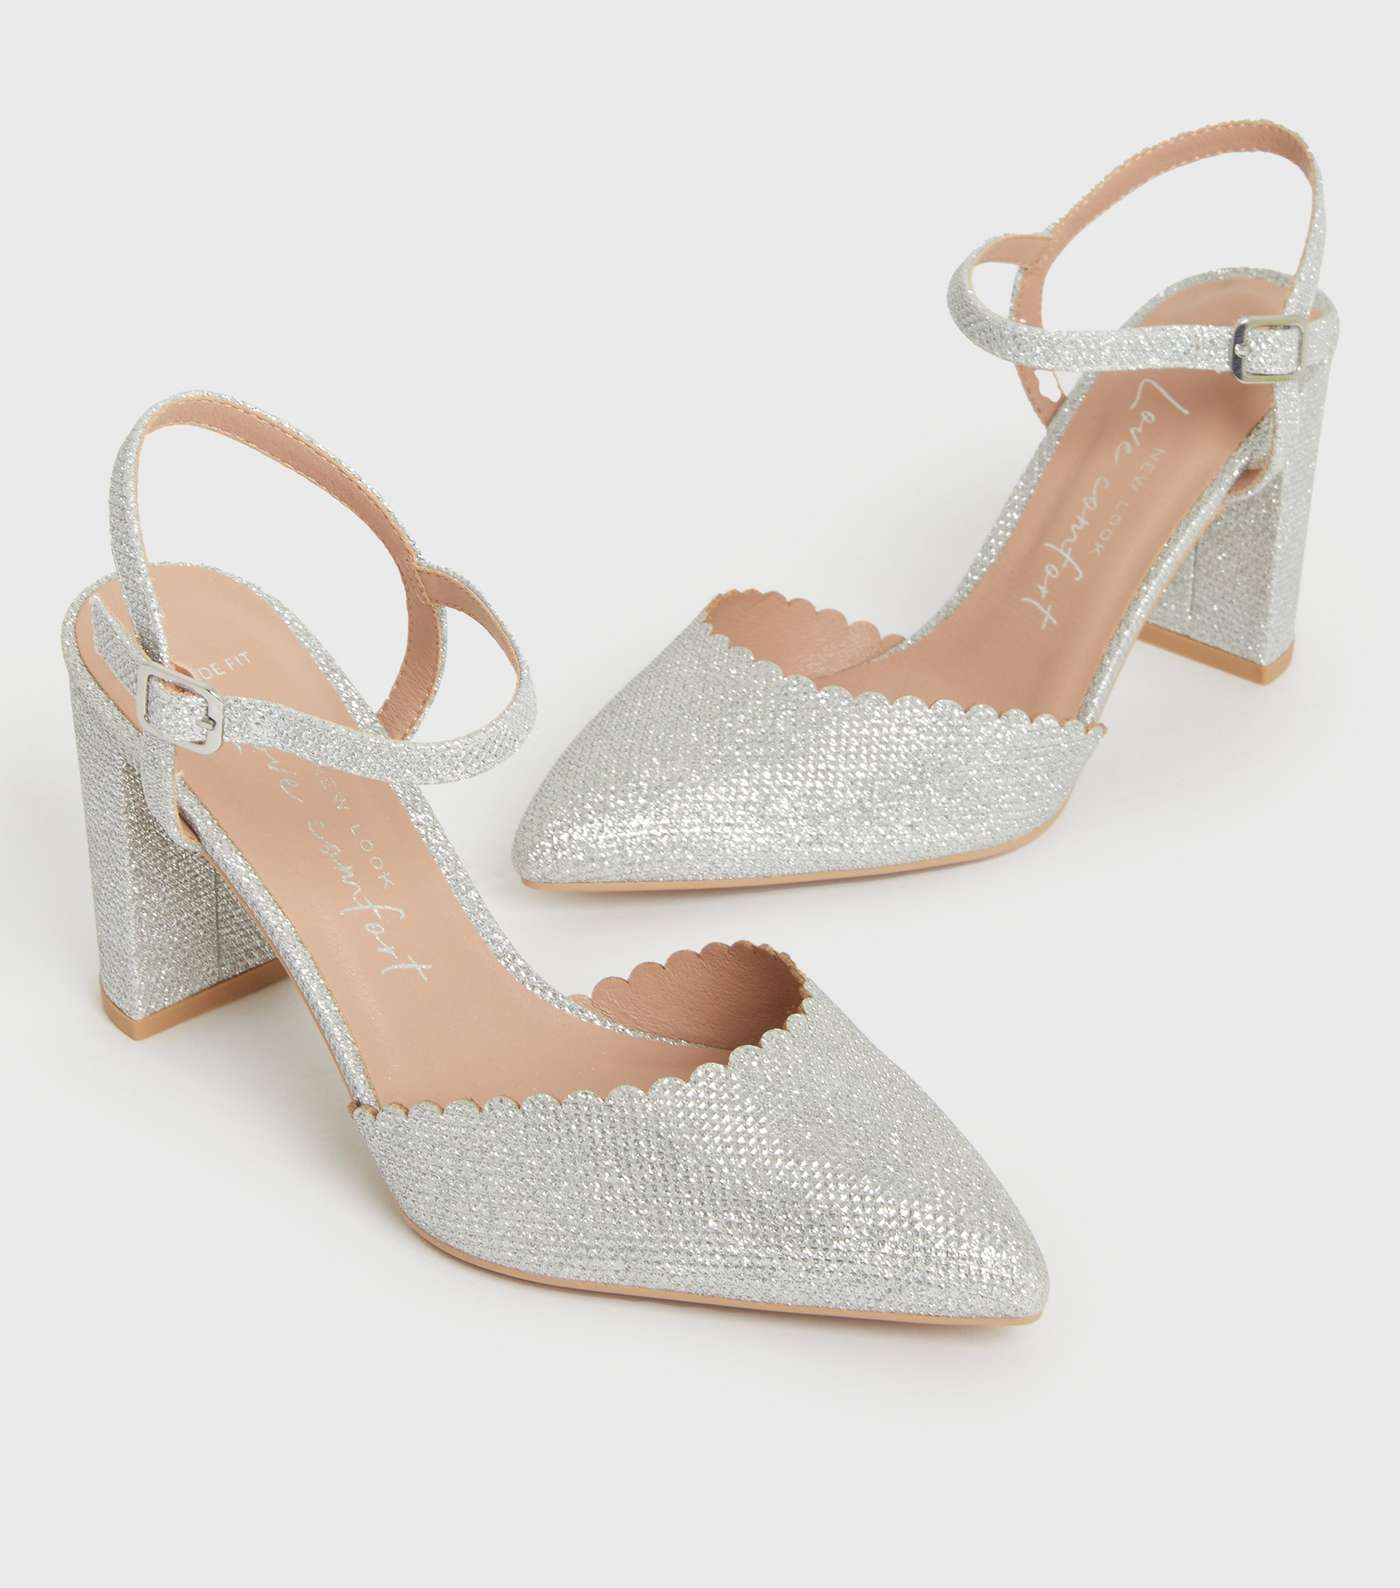 Wide Fit Silver Glitter Scallop Block Heel Court Shoes Image 3